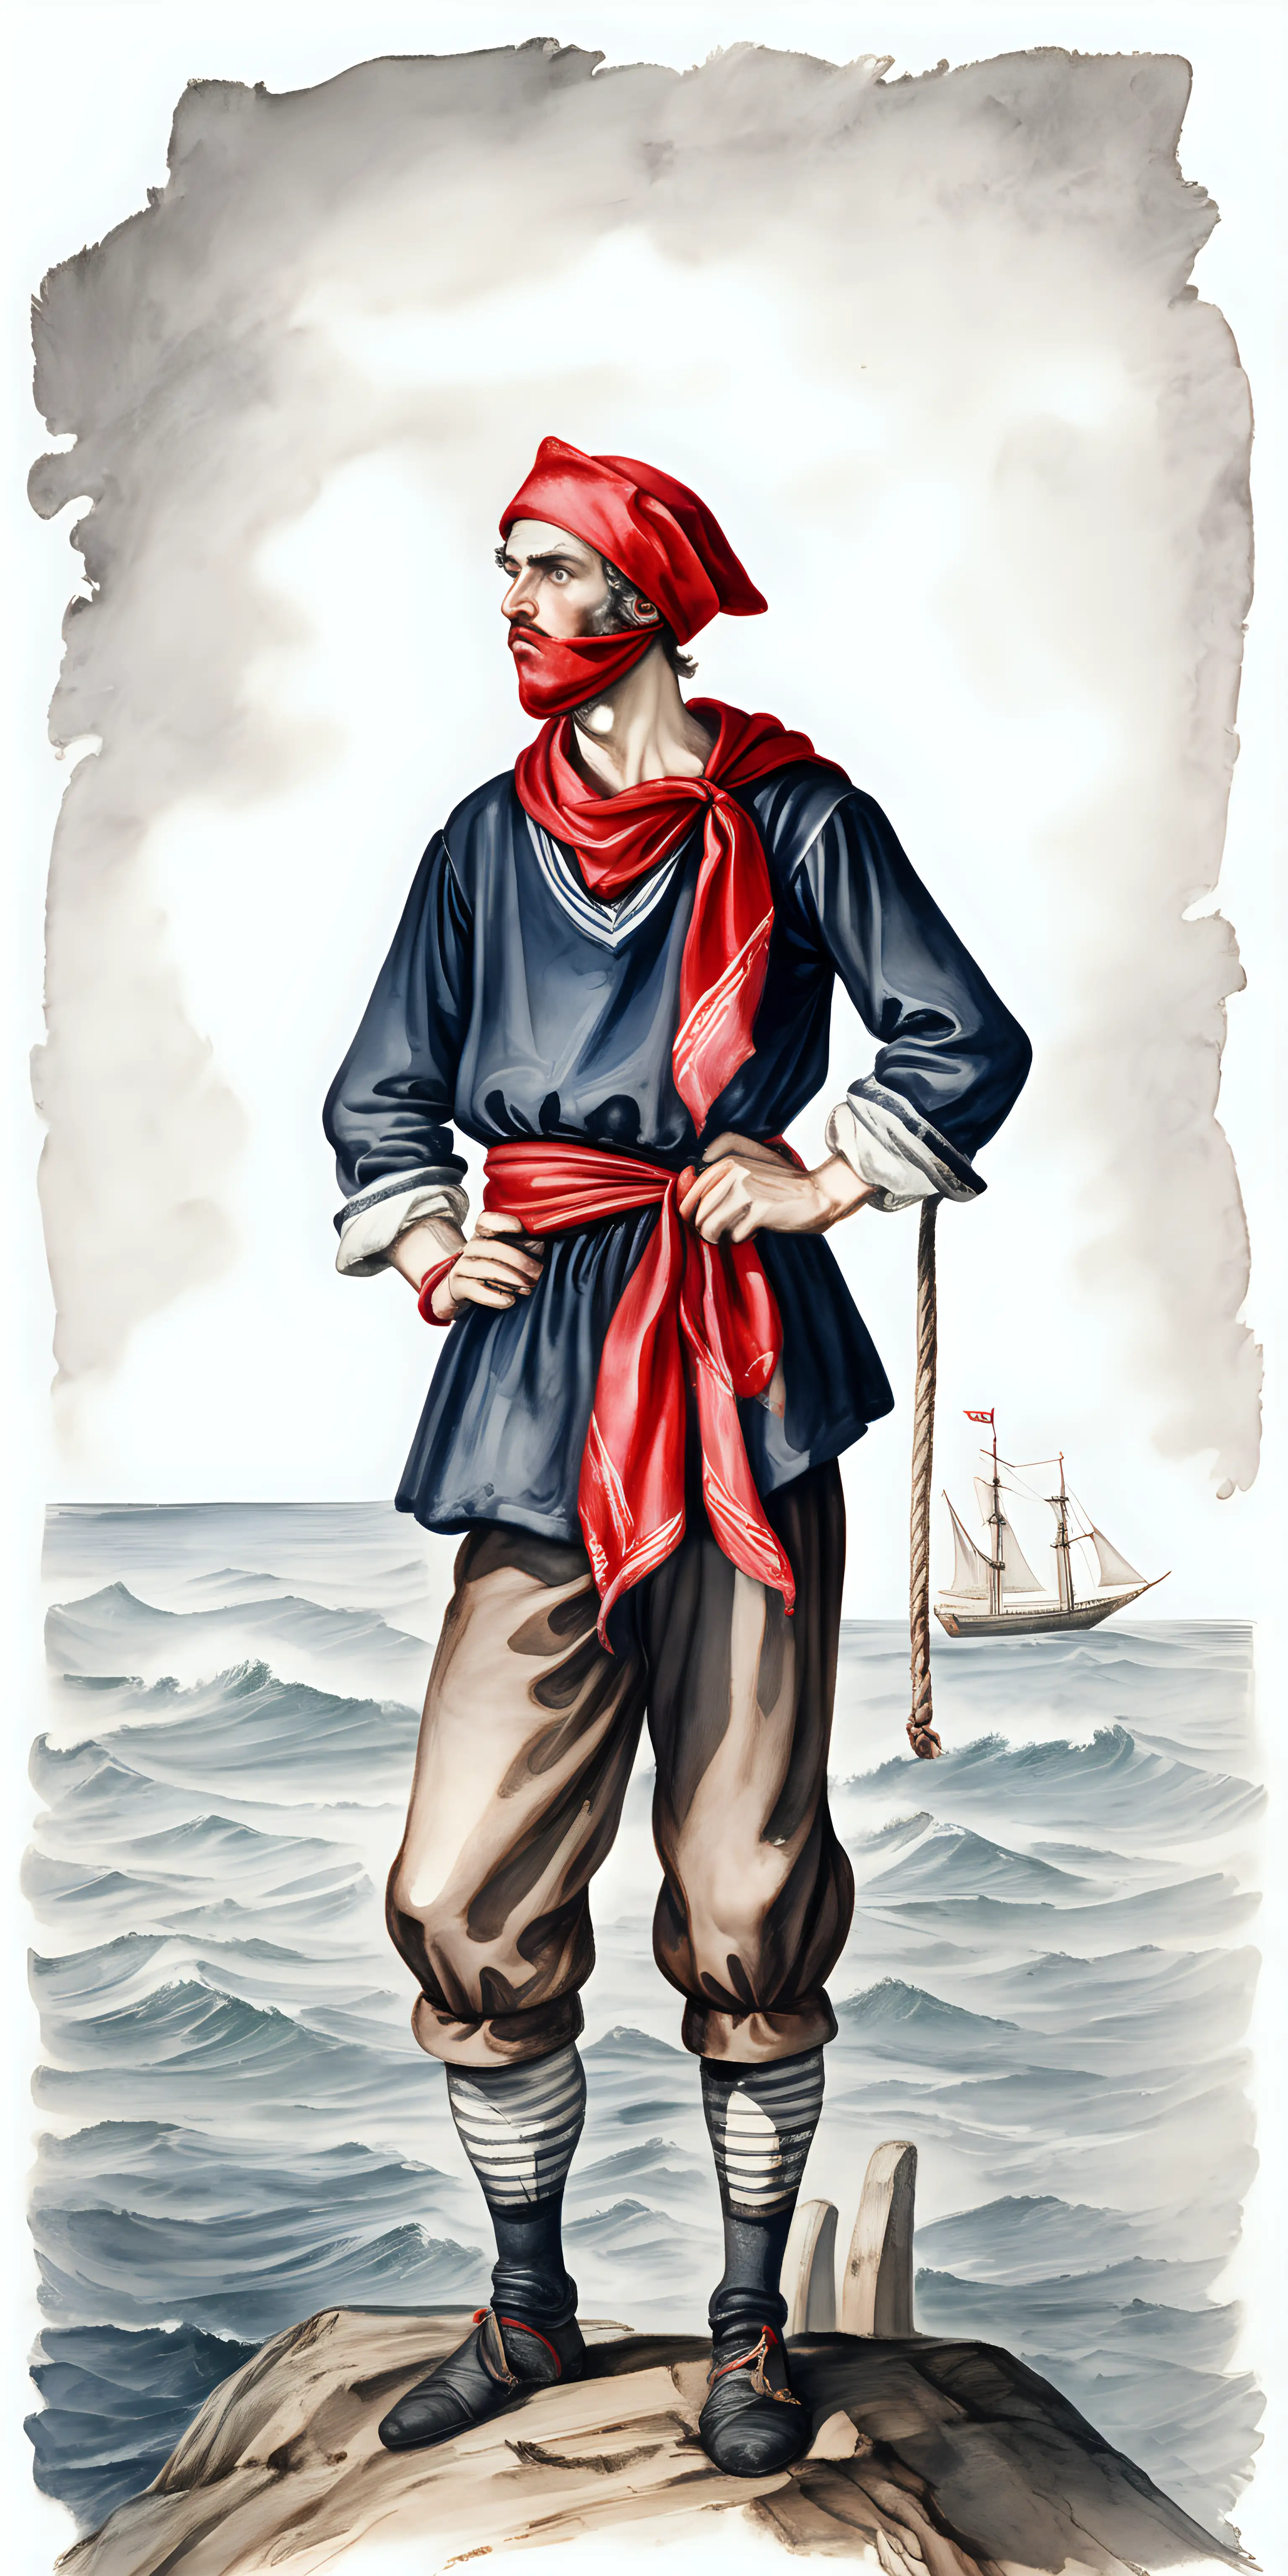 full view of medieval male sailor with red bandana tied around head keeping lookout, dark watercolor drawing, no background